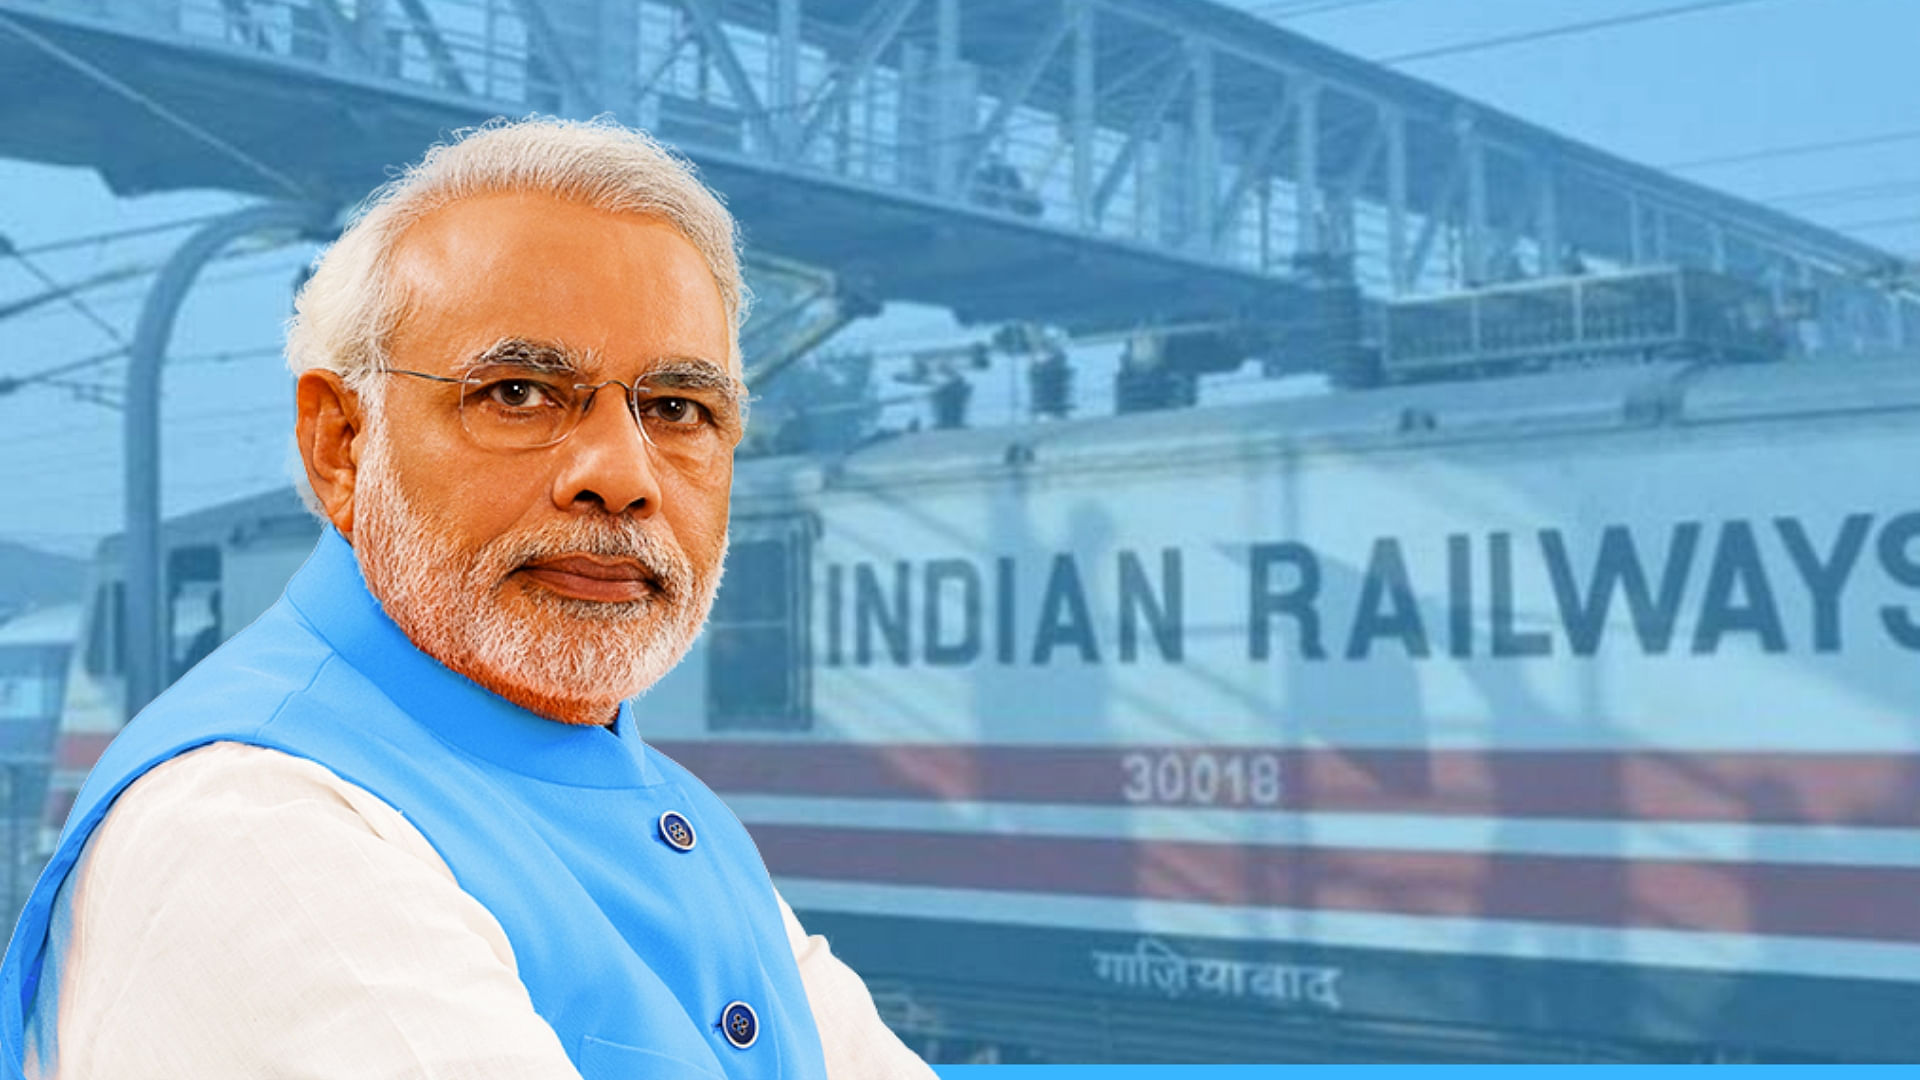 Tickets carrying photographs of PM Modi were issued to passengers at Barabanki railway station.